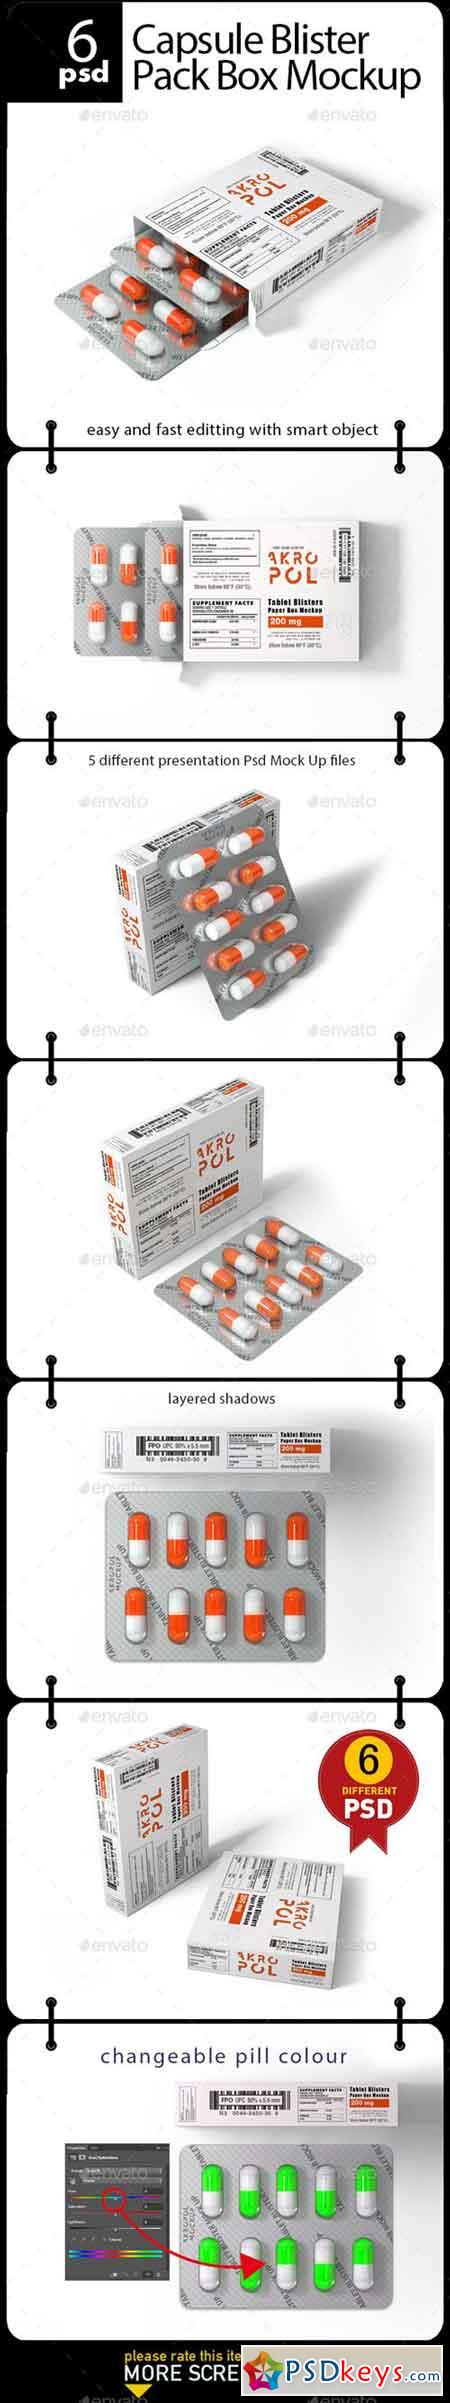 Download Capsule Blister Pack Box Mockup 20348190 » Free Download Photoshop Vector Stock image Via ...